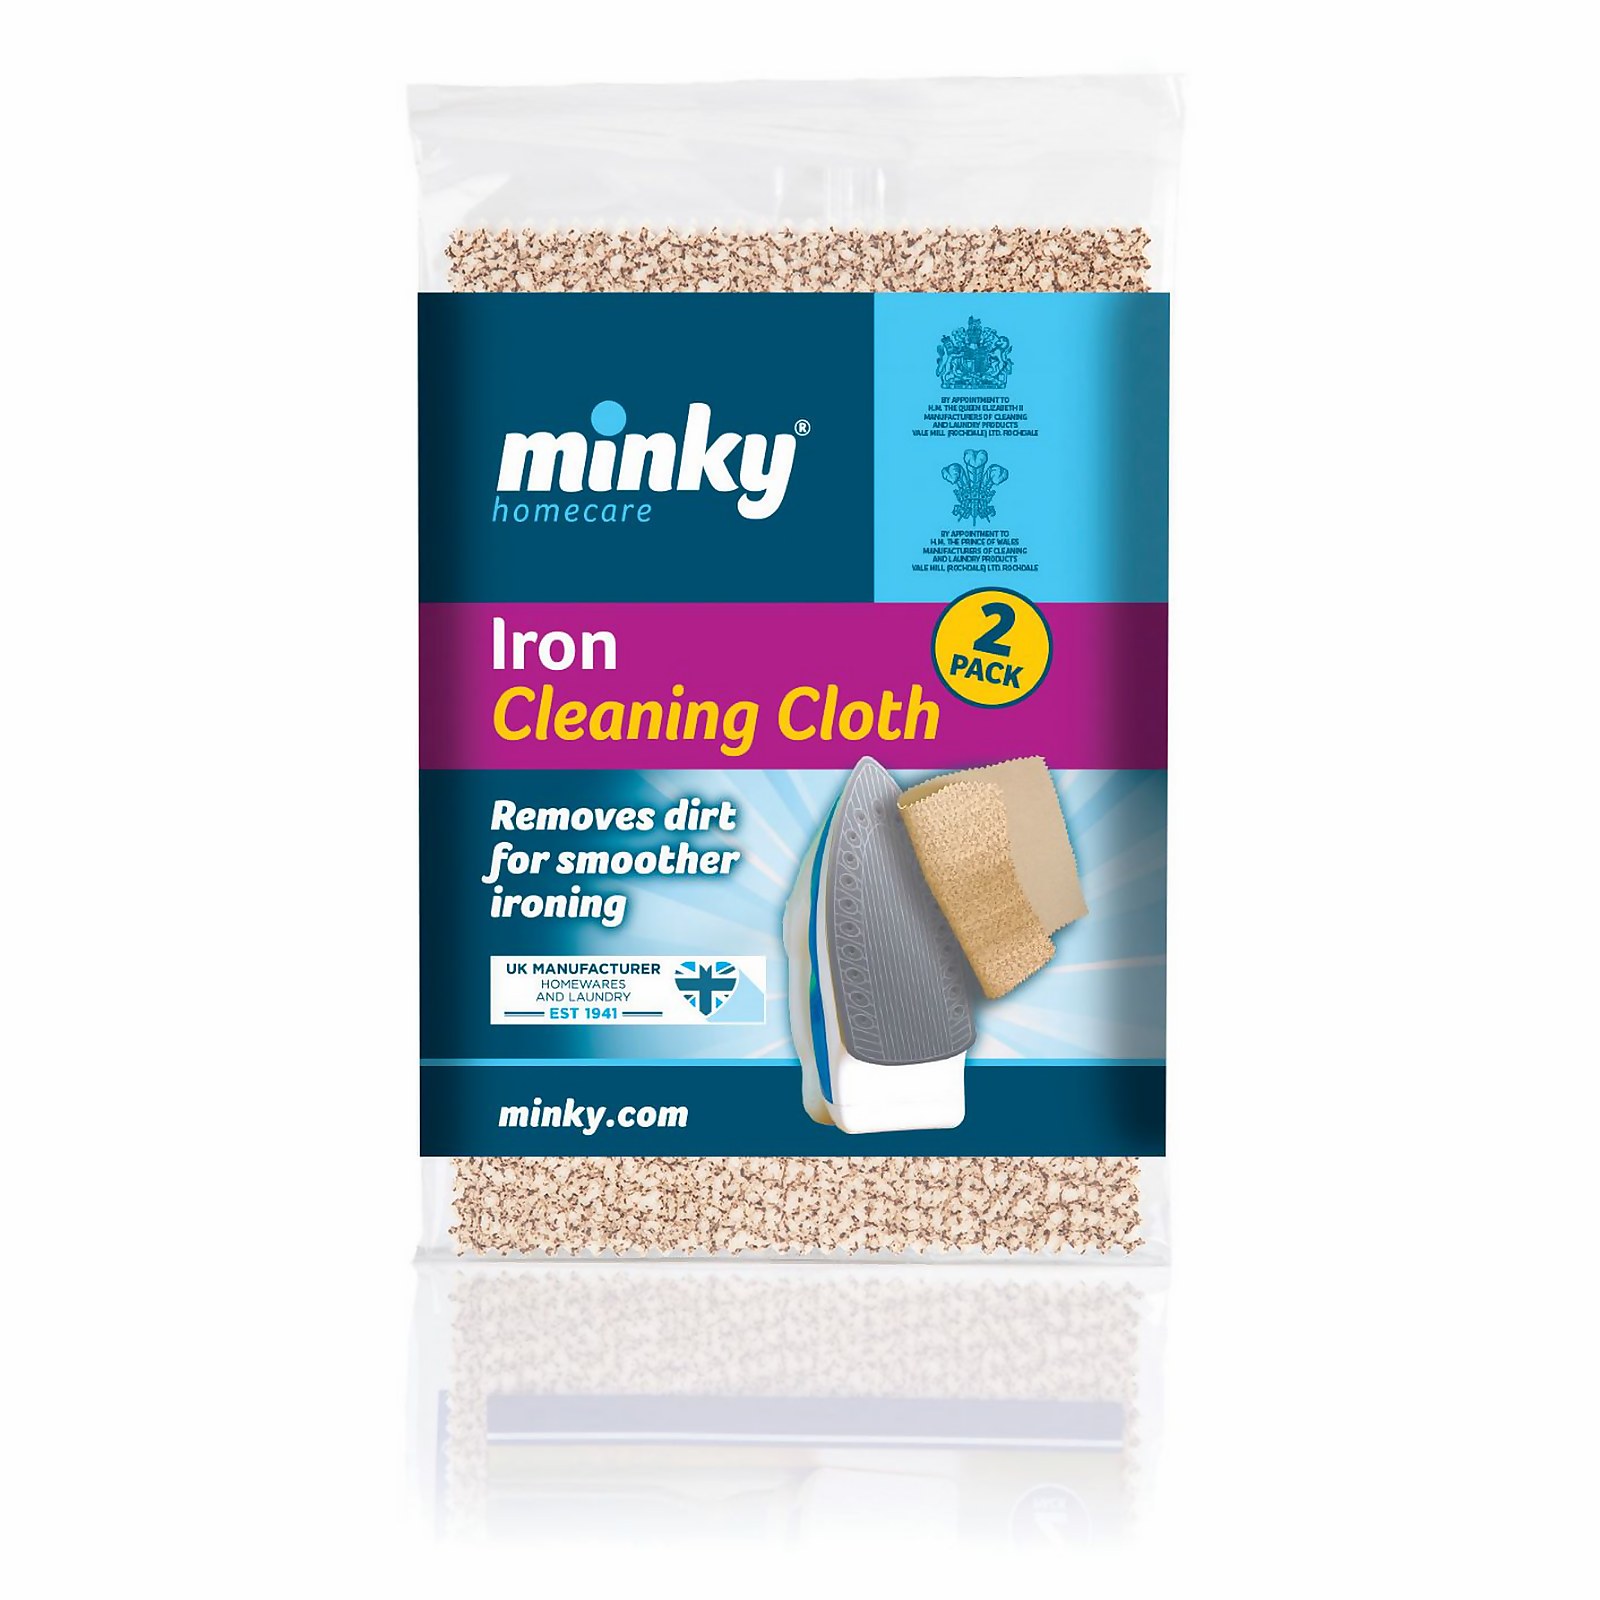 Photo of Minky Iron Cleaning Cloth 2 Pack